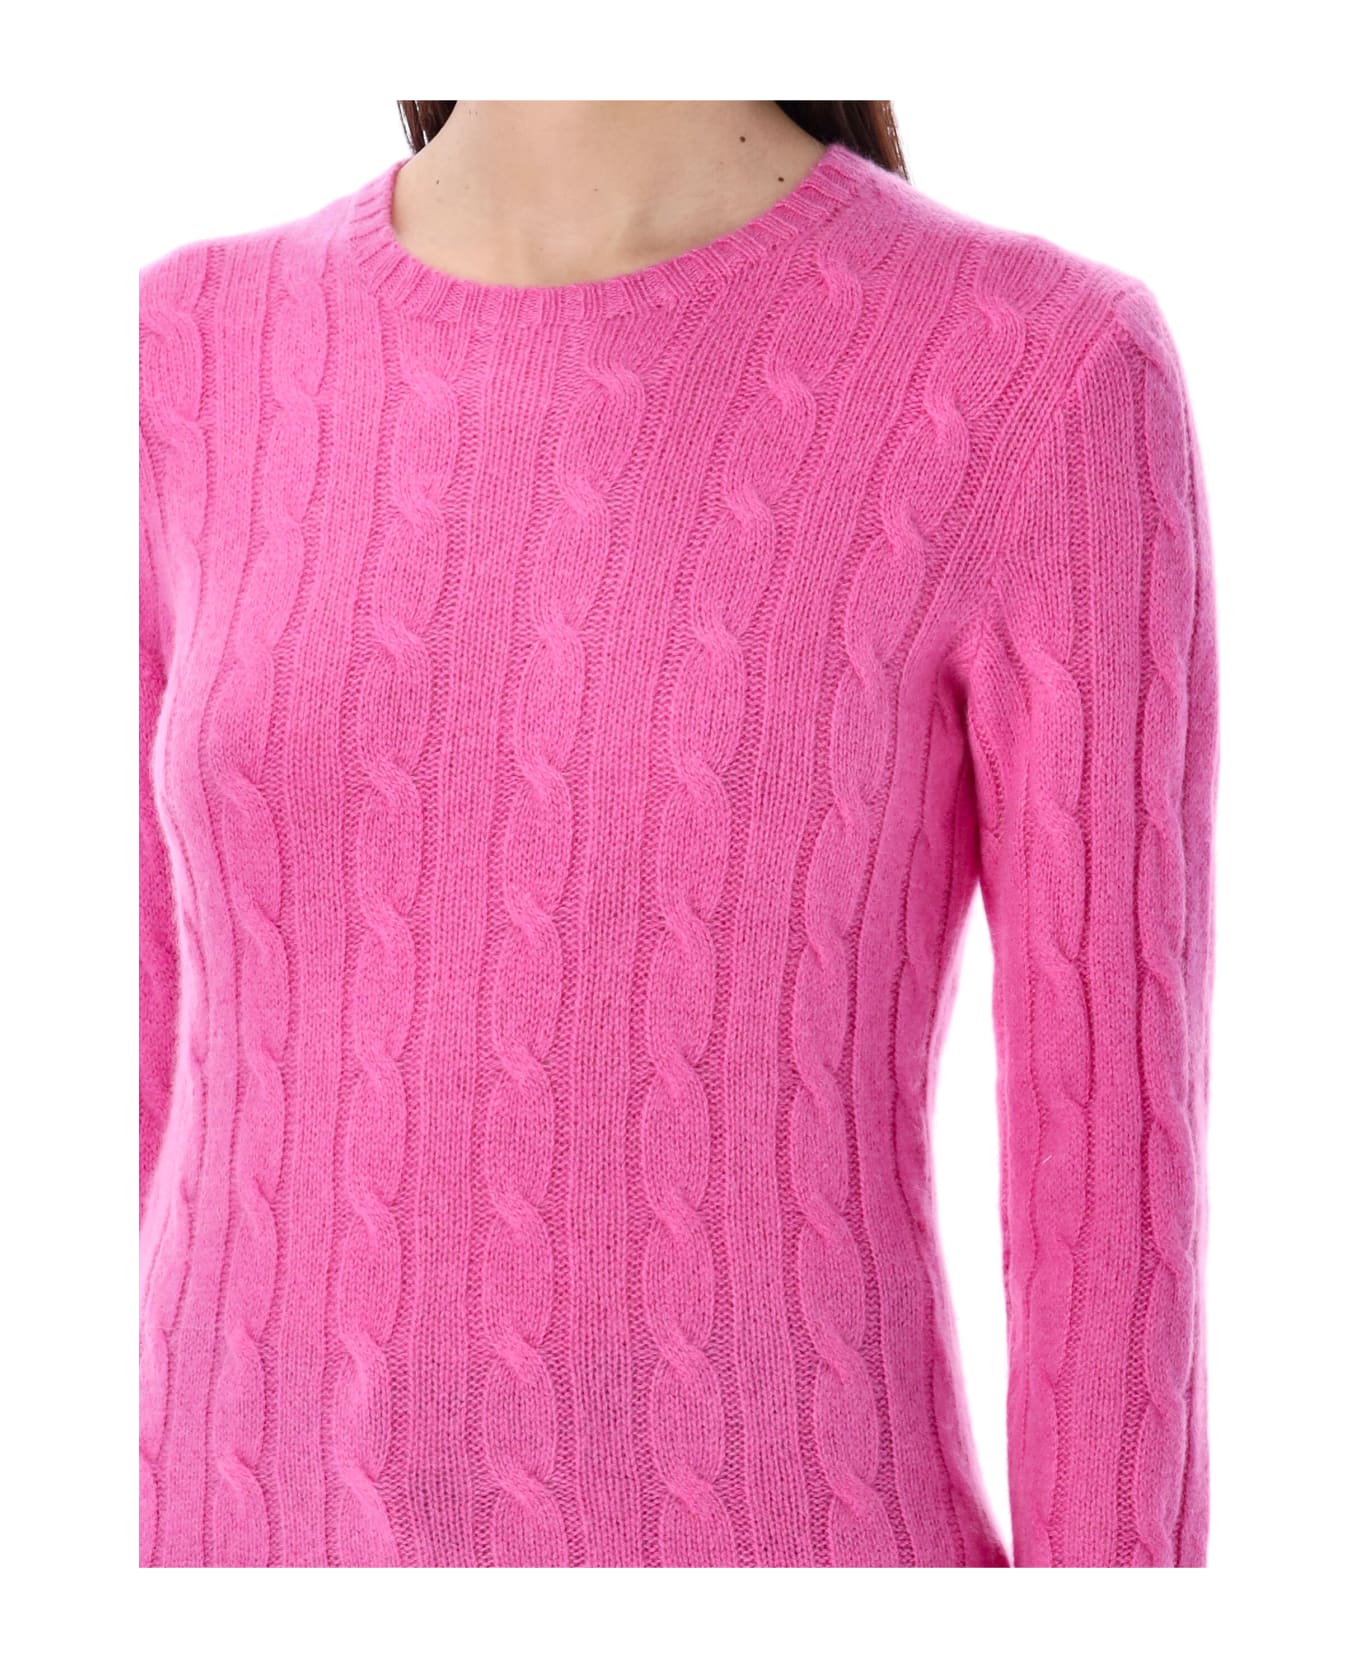 Polo Ralph Lauren Julianna Cable Knit Sweater - PINK FUXIA ニットウェア